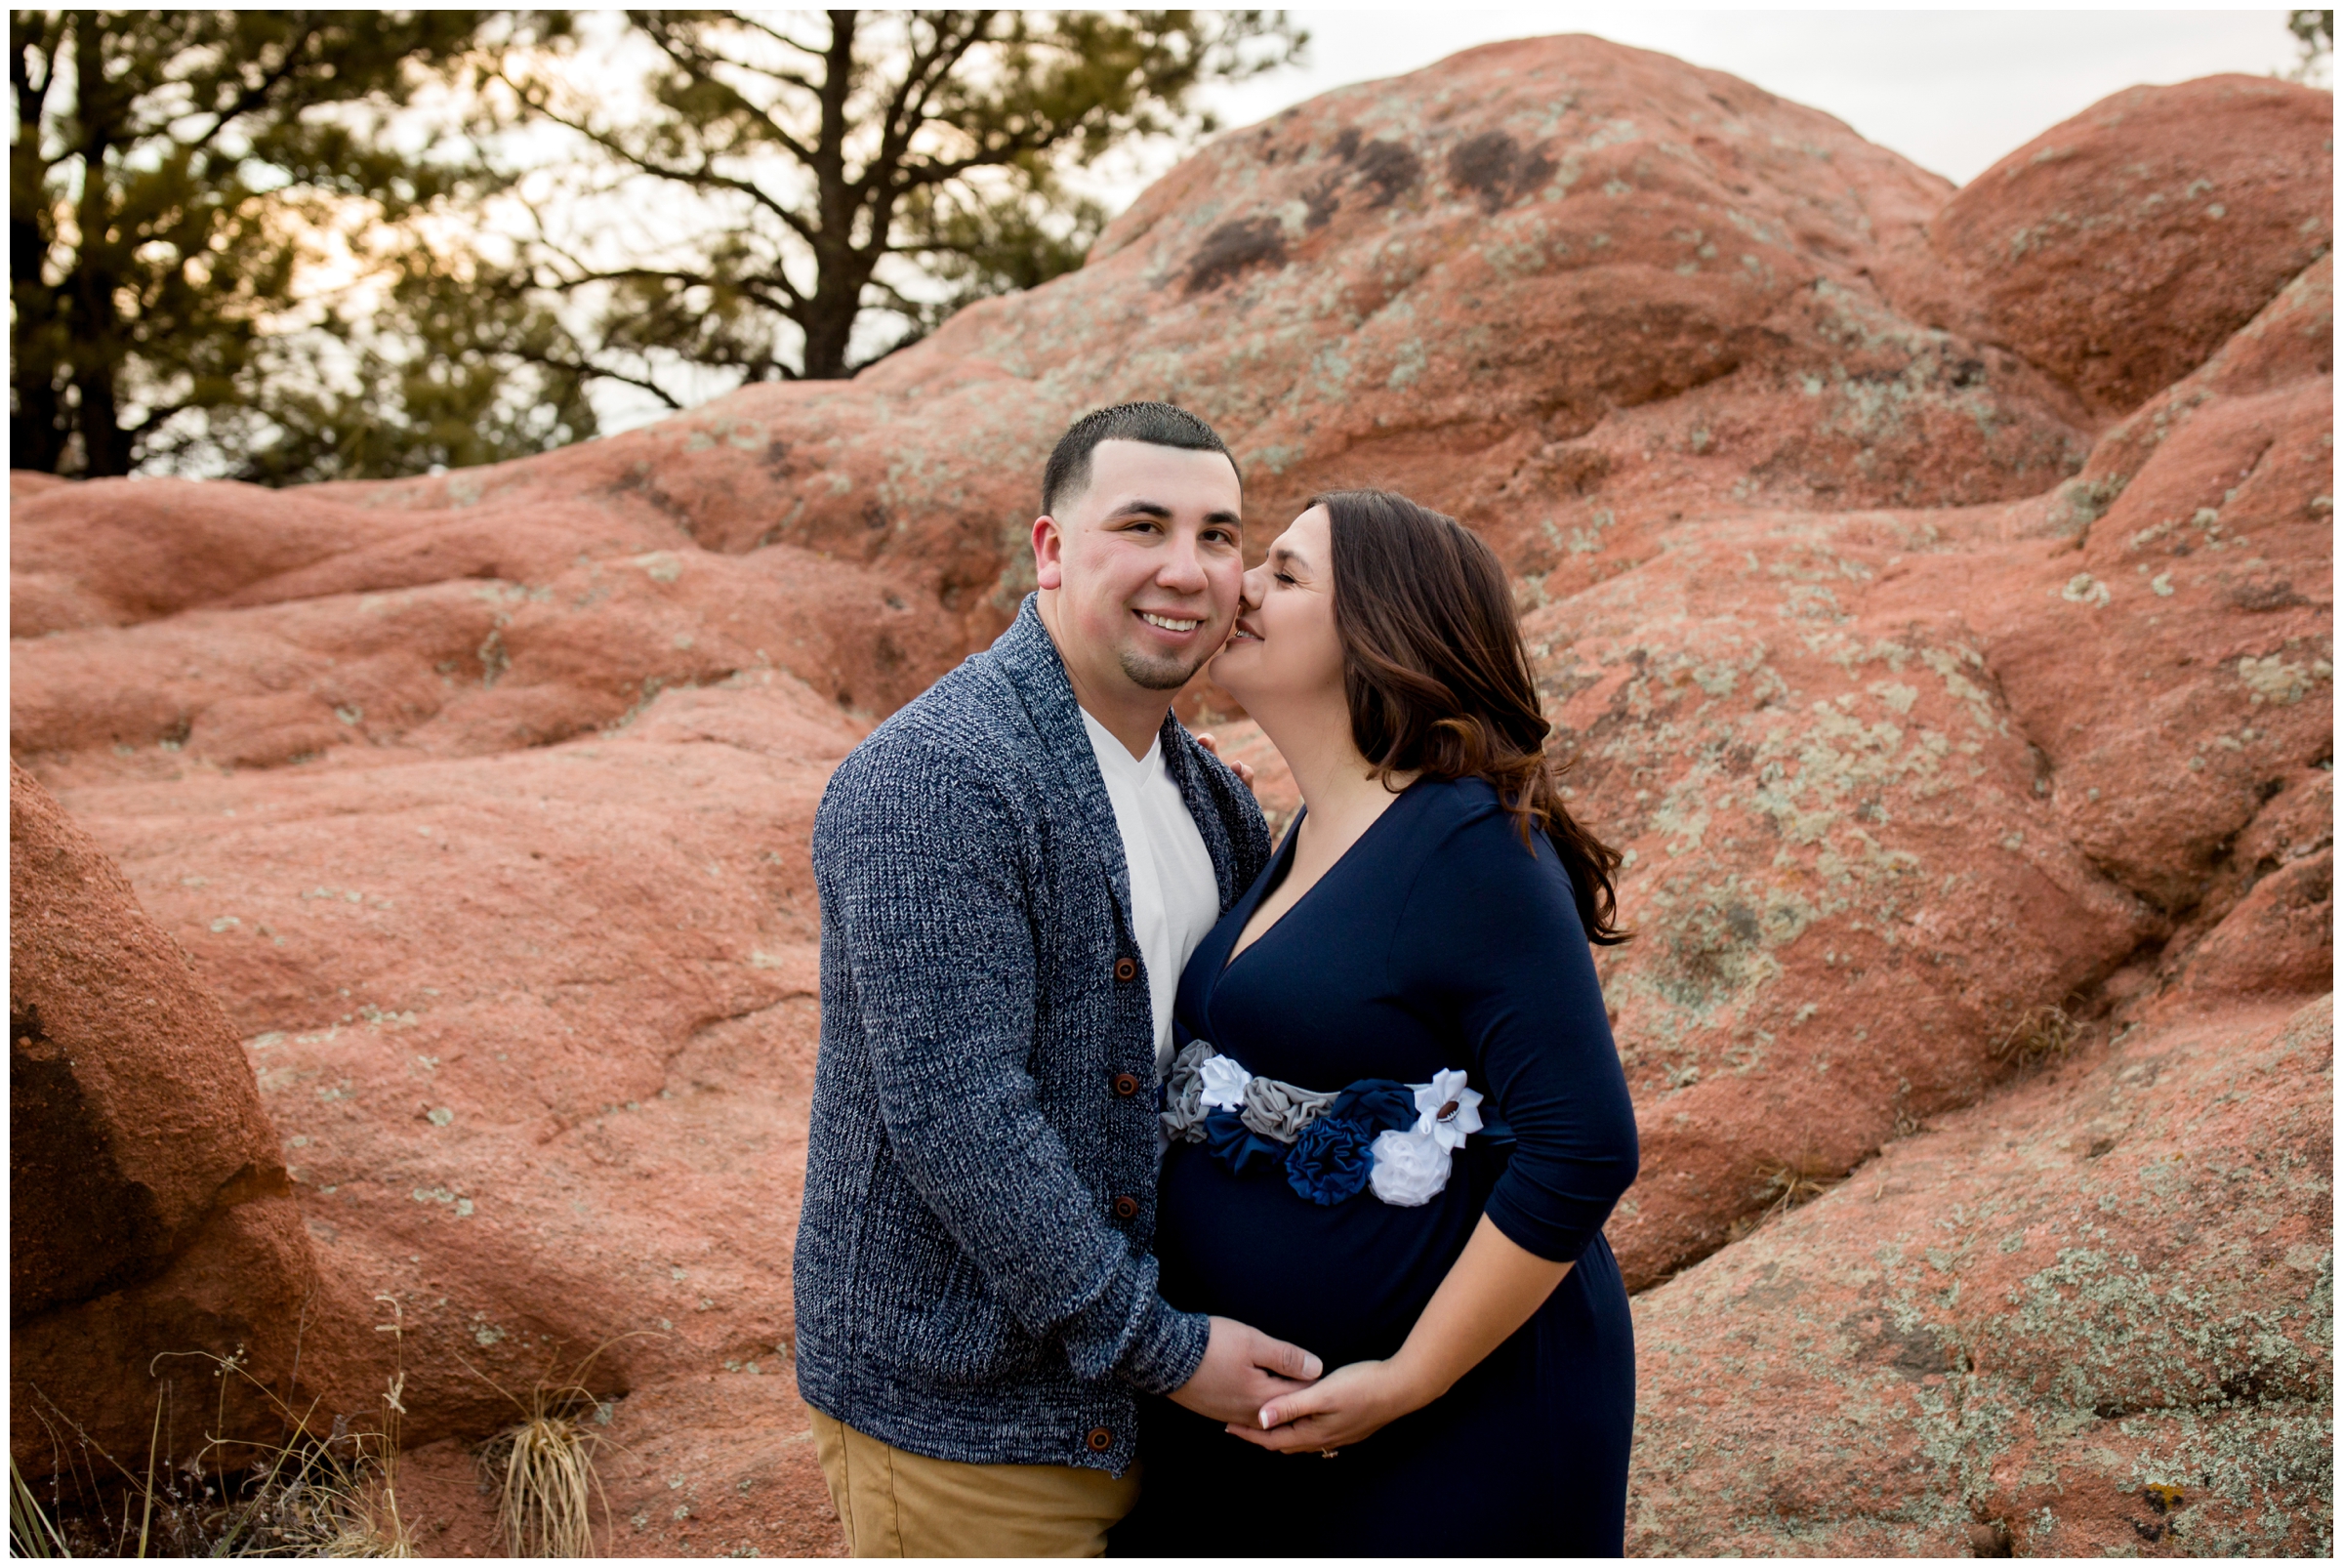 winter Colorado Springs maternity photography at Garden of the Gods park by Denver portrait photographer Plum Pretty Photography